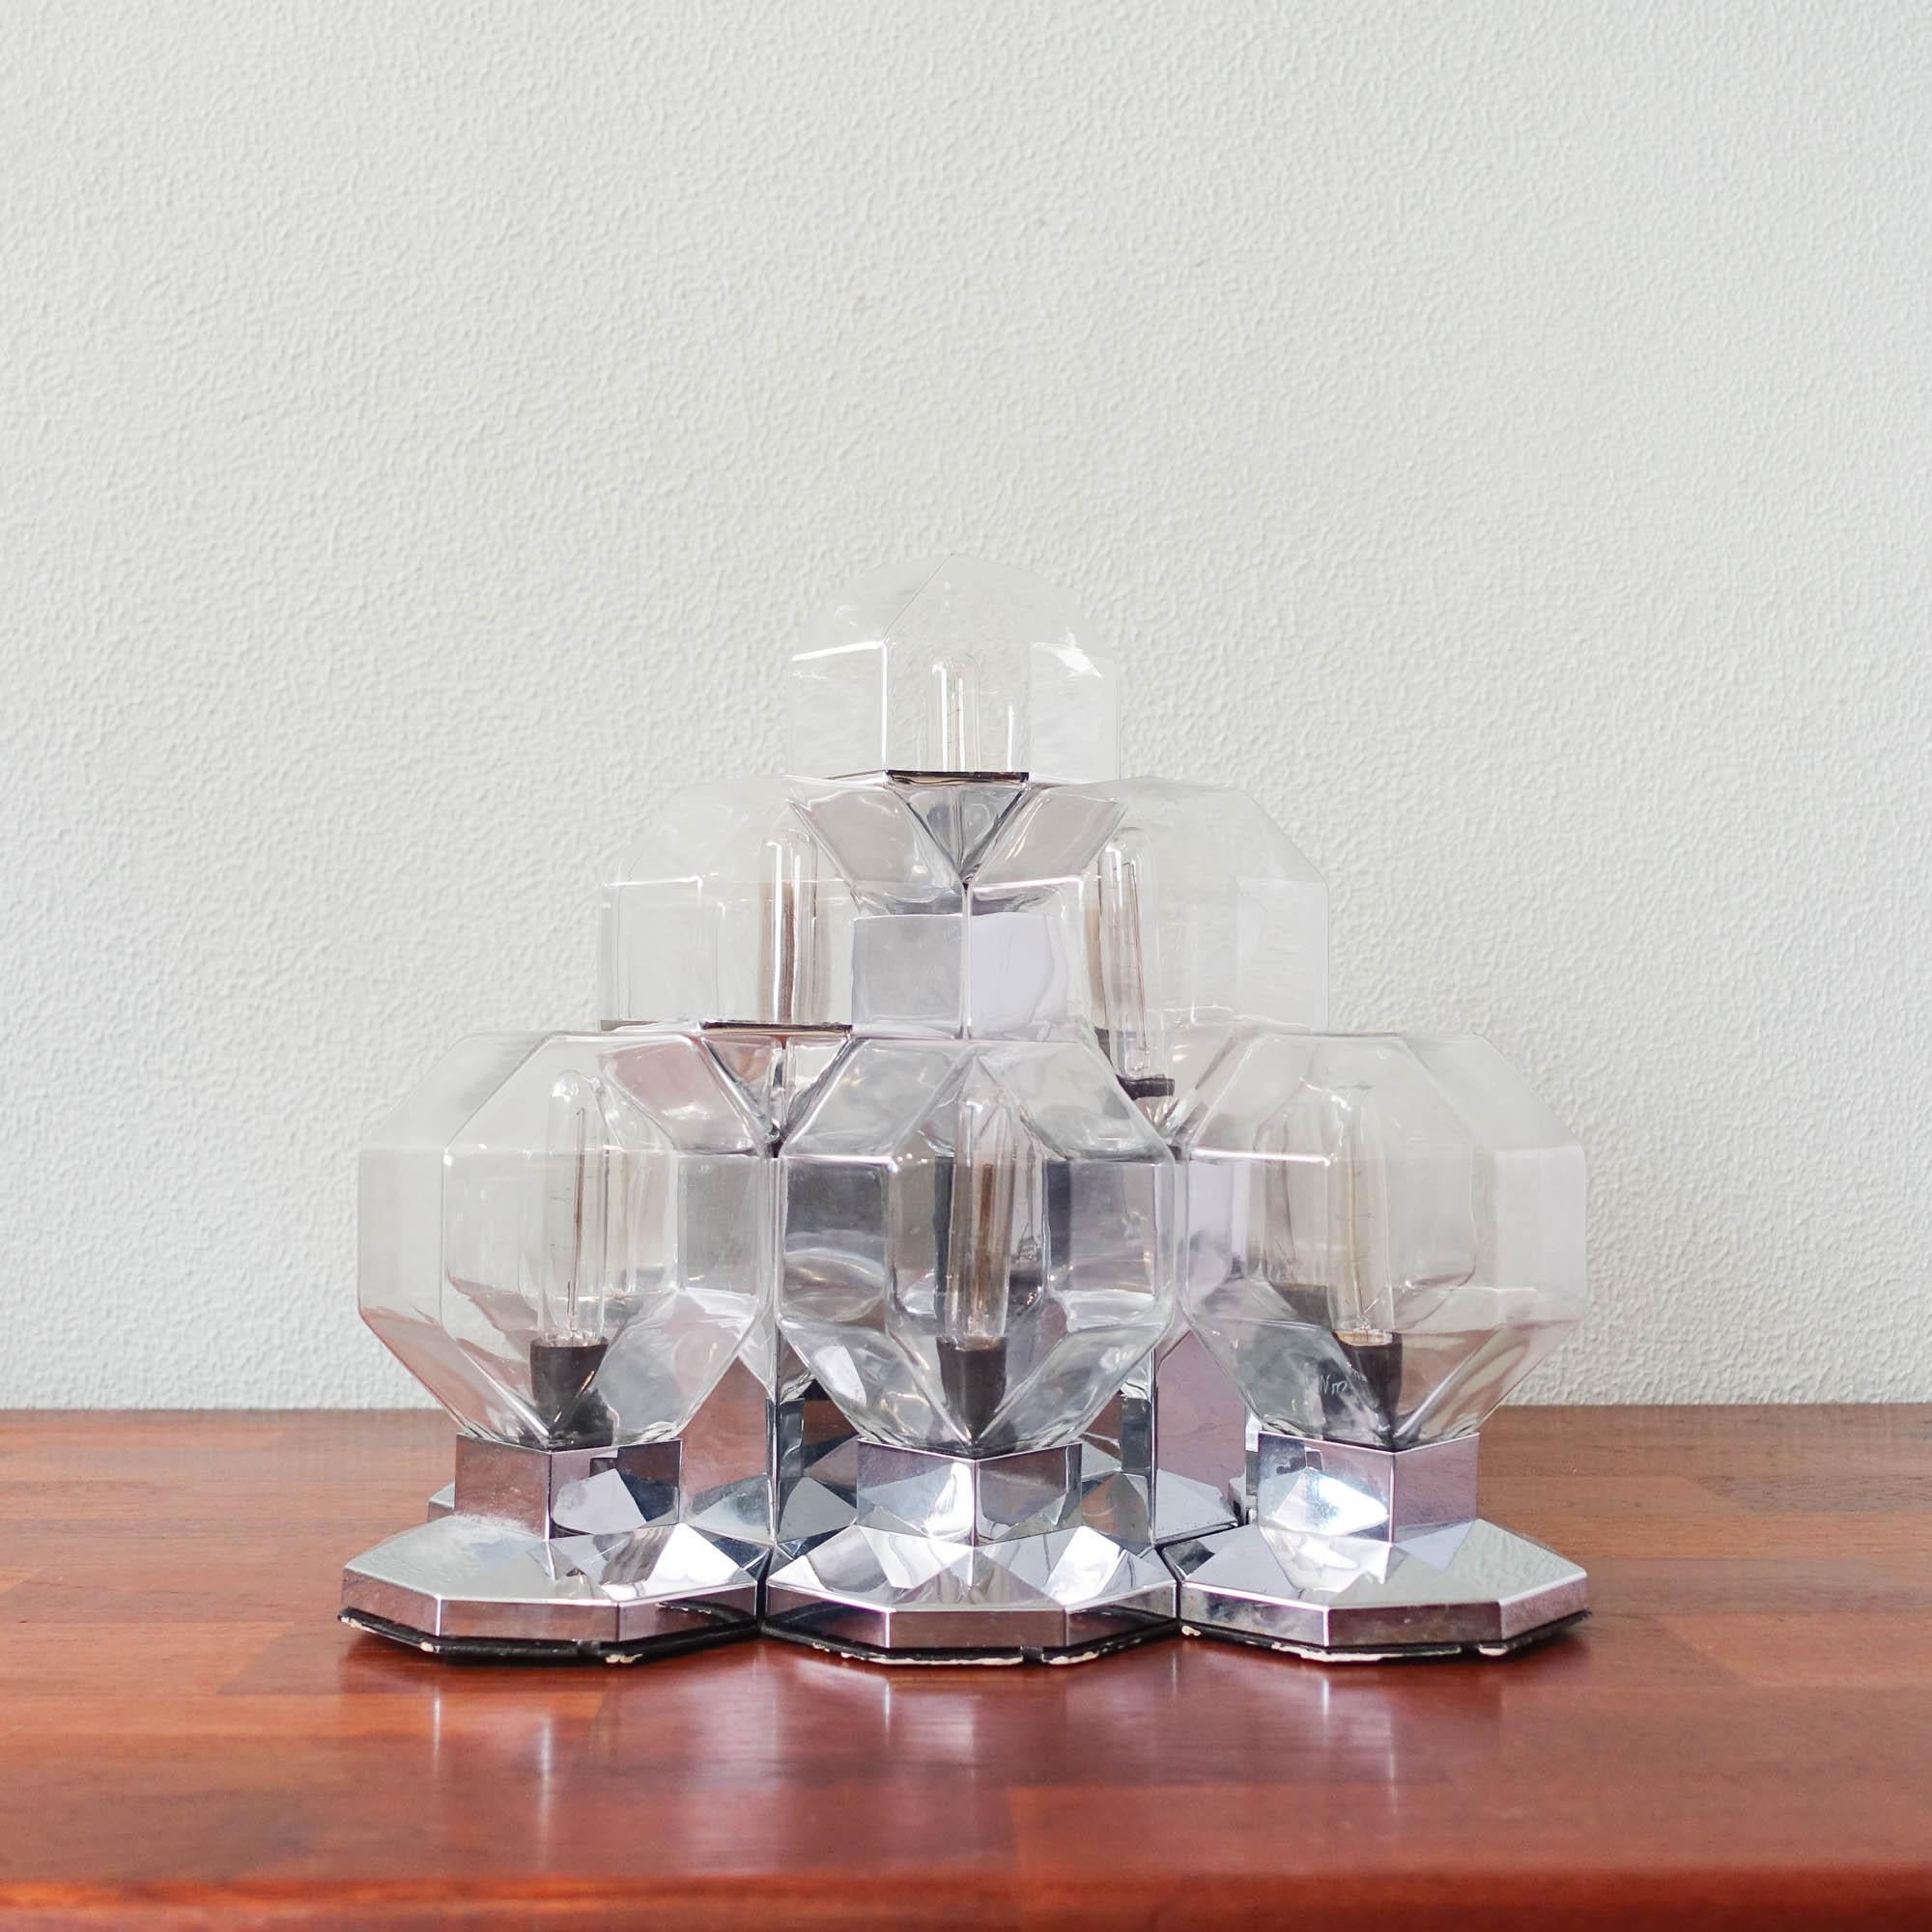 Metal Large German Modular Sconce by Motoko Ishii for Staff, 1970s For Sale